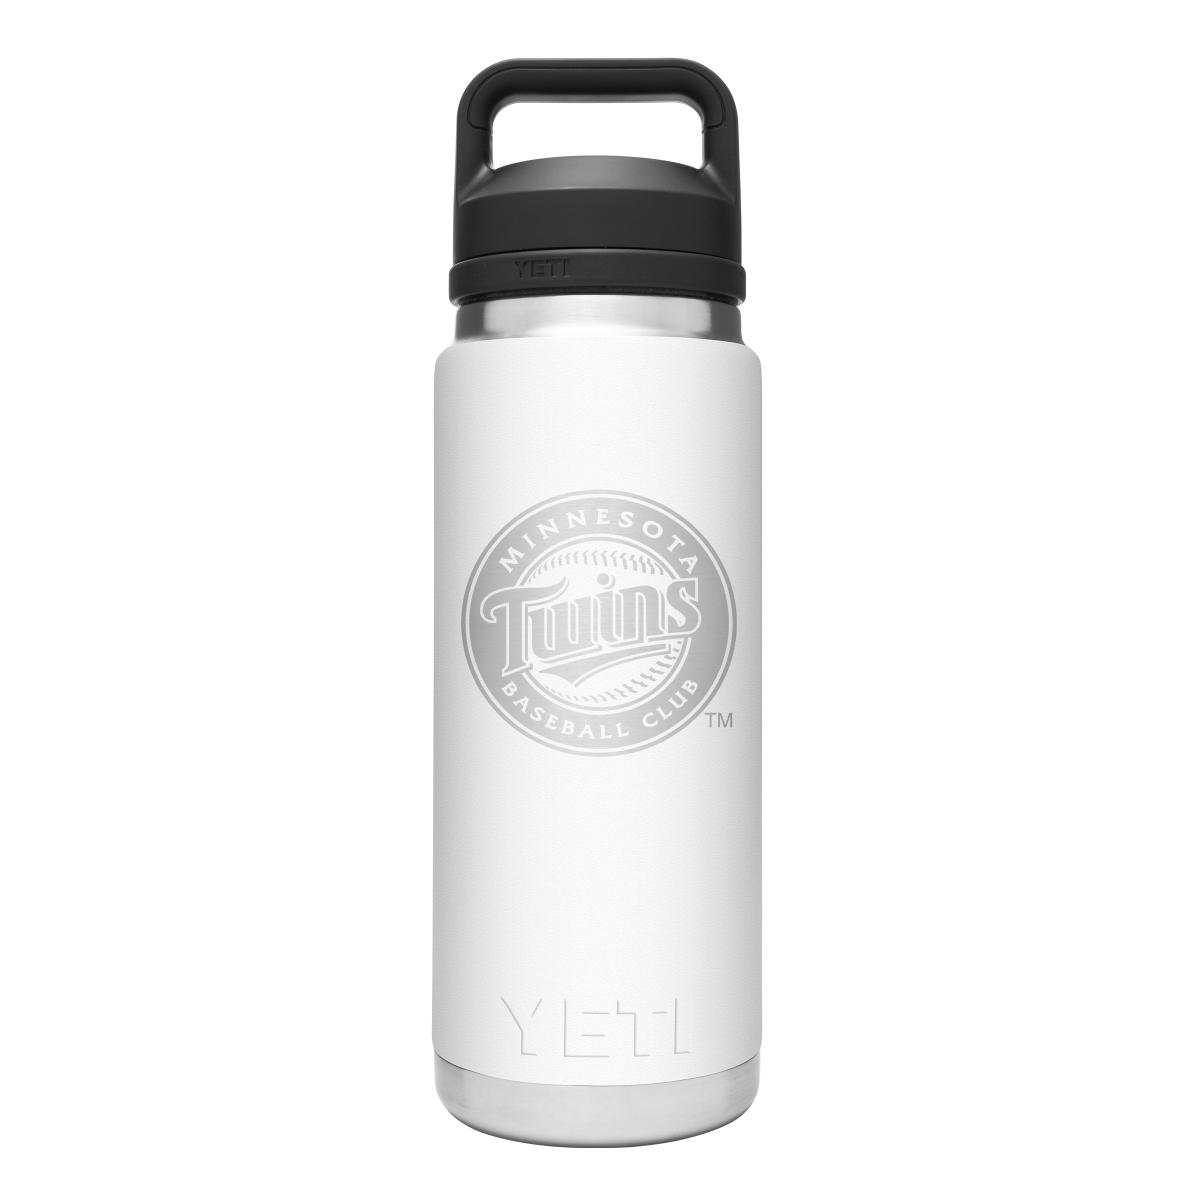 Minnesota Twins custom Coolers and Drinkware from YETI, where to